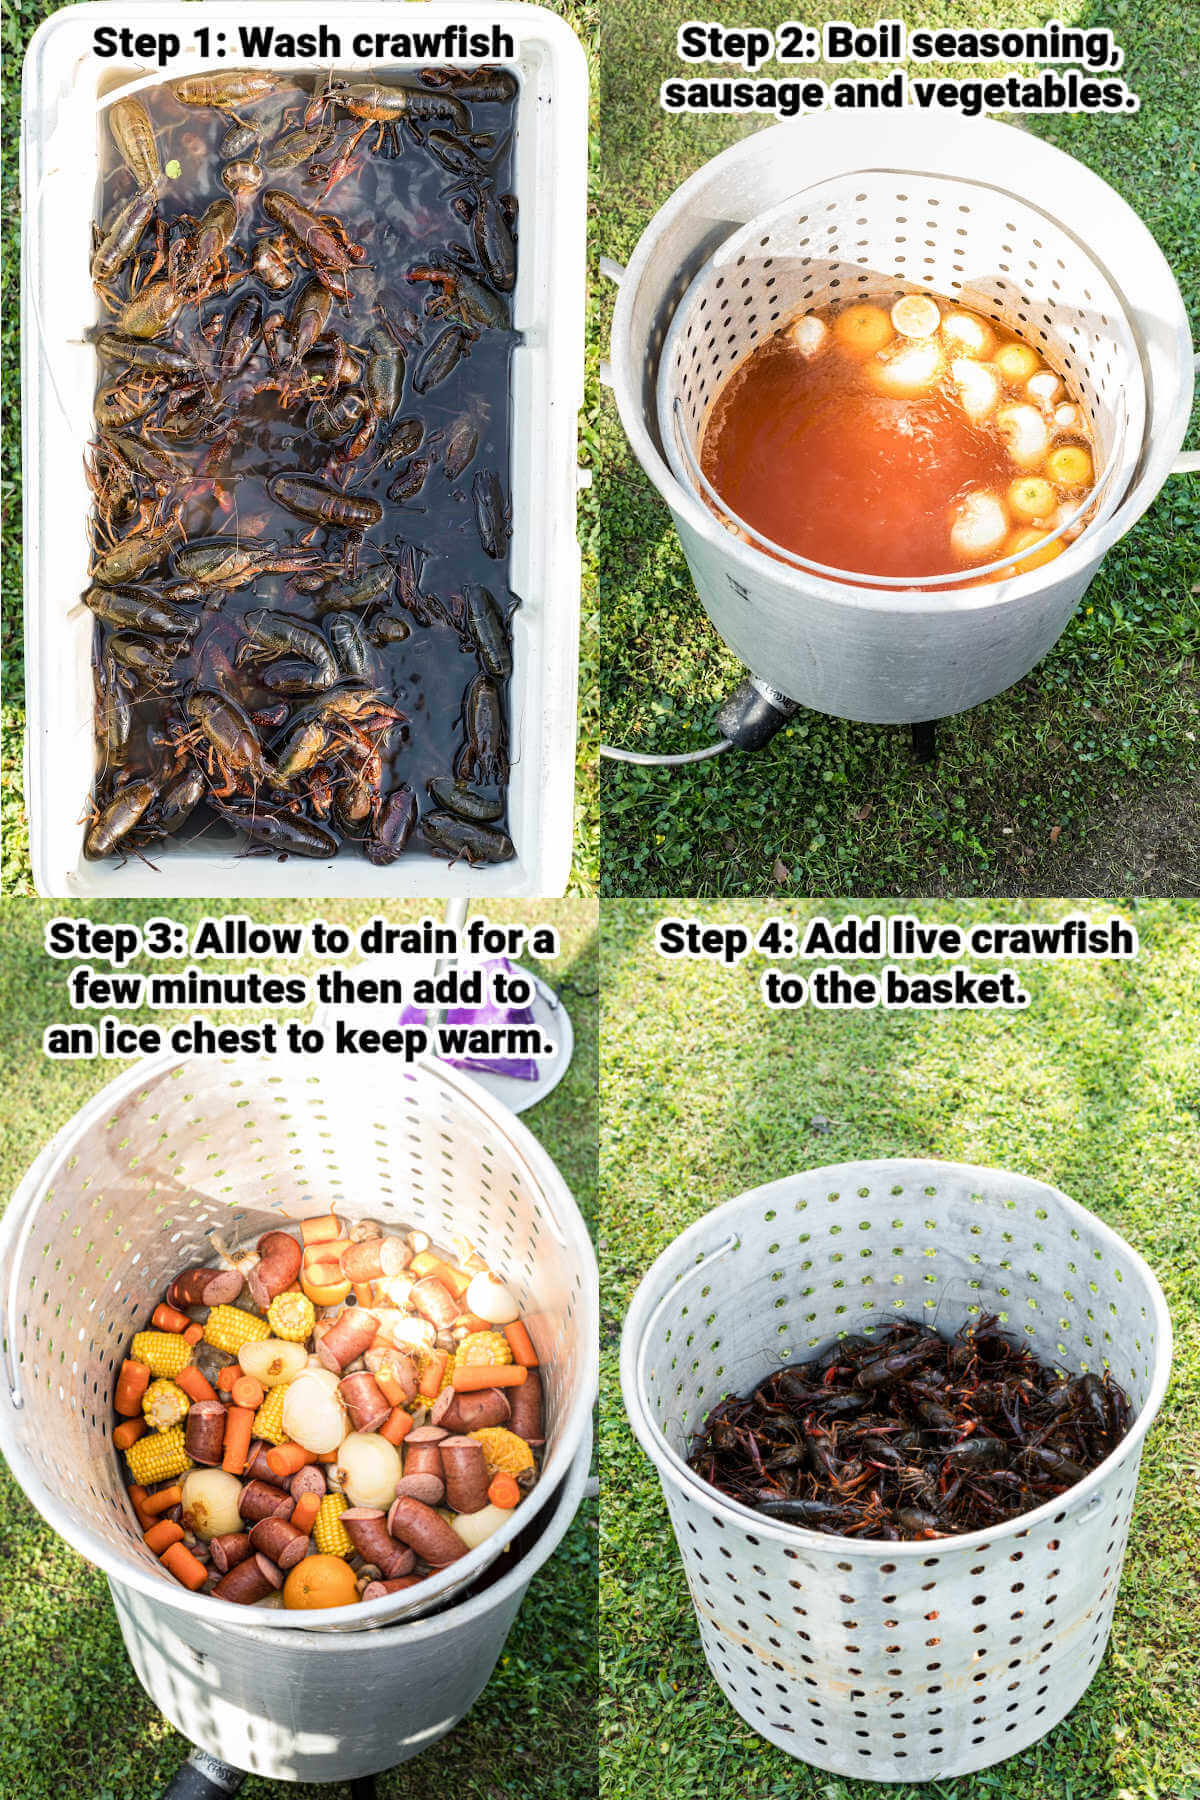 how to boil crawfish steps 1 through 4 - images